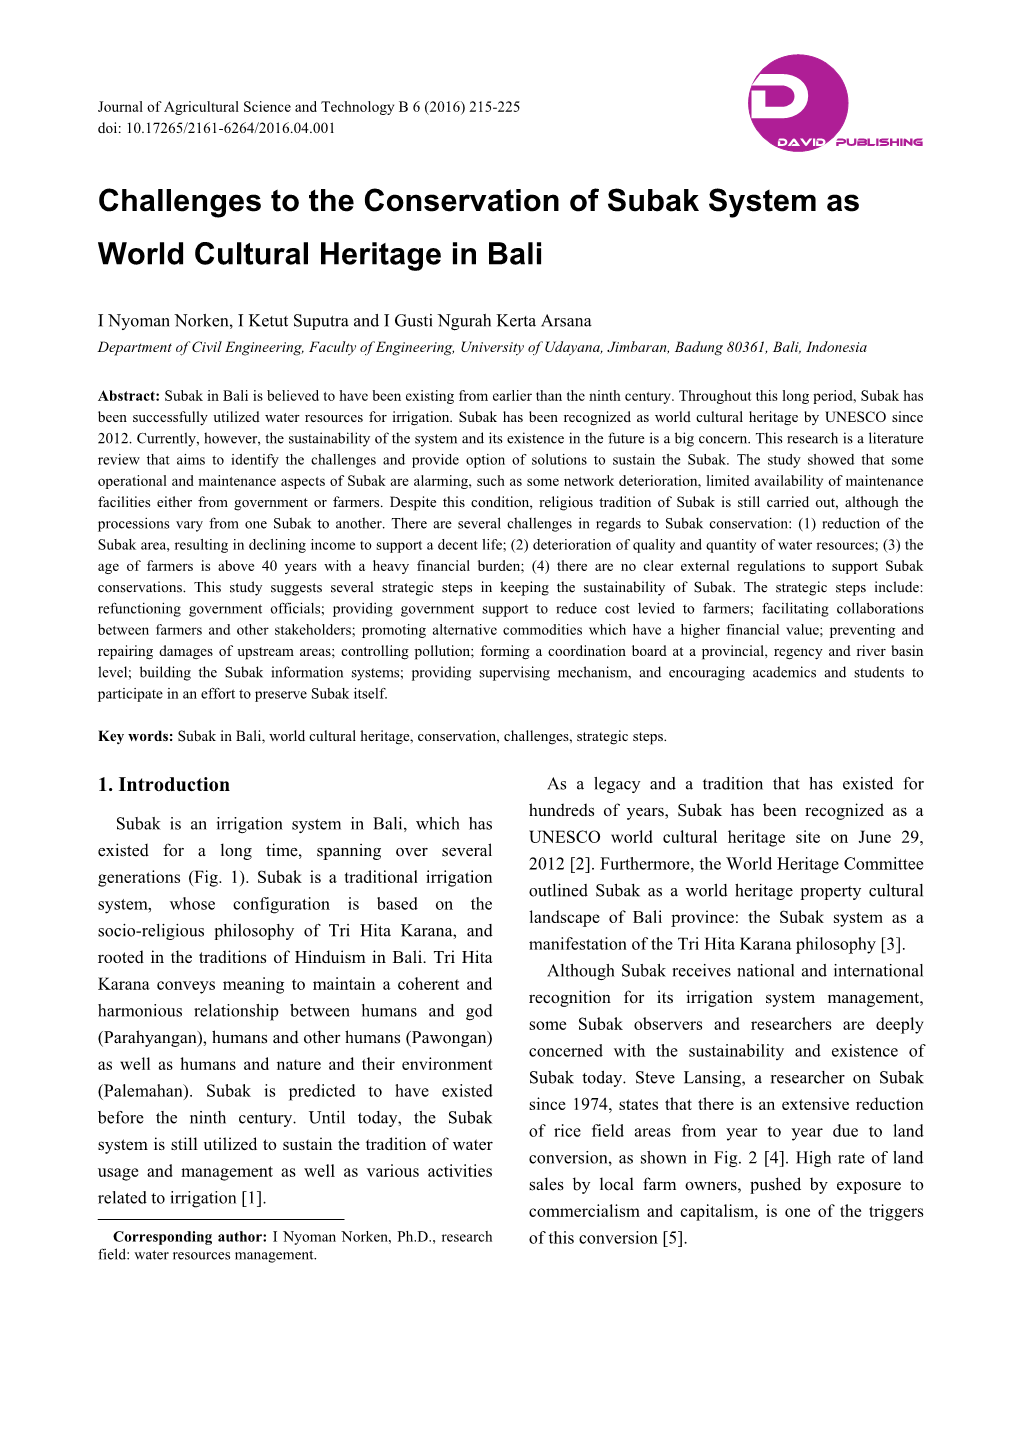 Challenges to the Conservation of Subak System As World Cultural Heritage in Bali